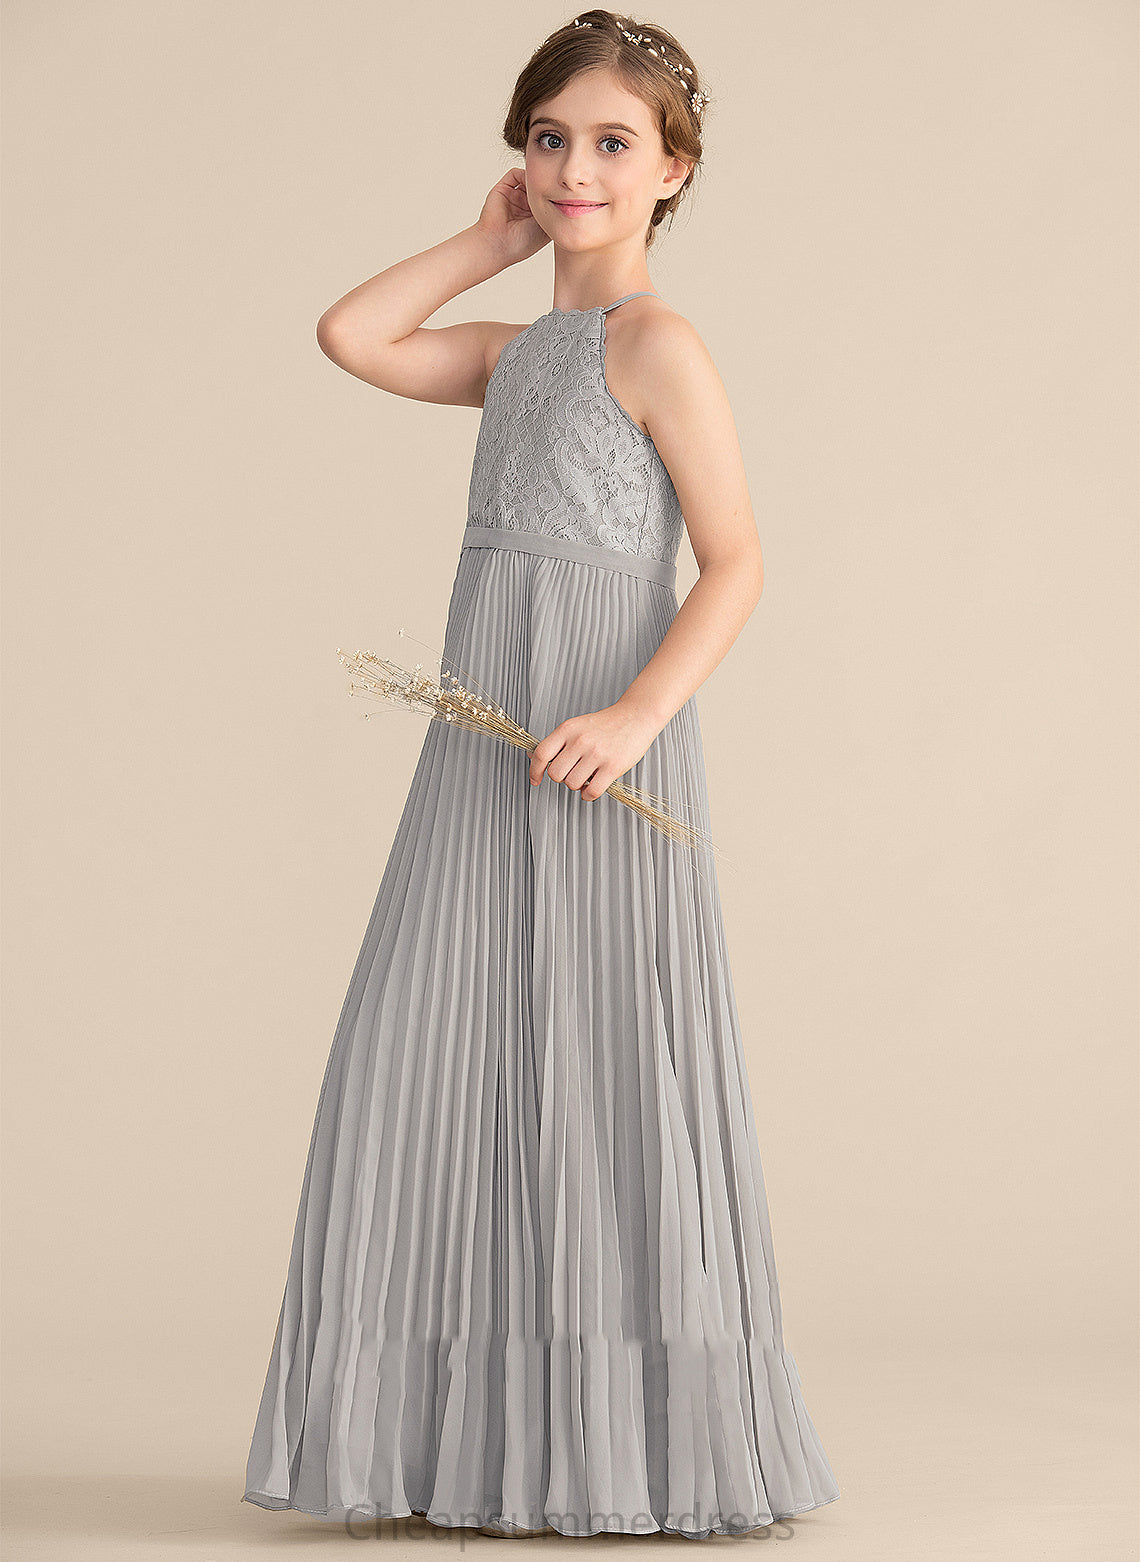 Pleated Lace With A-Line Junior Bridesmaid Dresses Chiffon Neck Anya Scoop Floor-Length